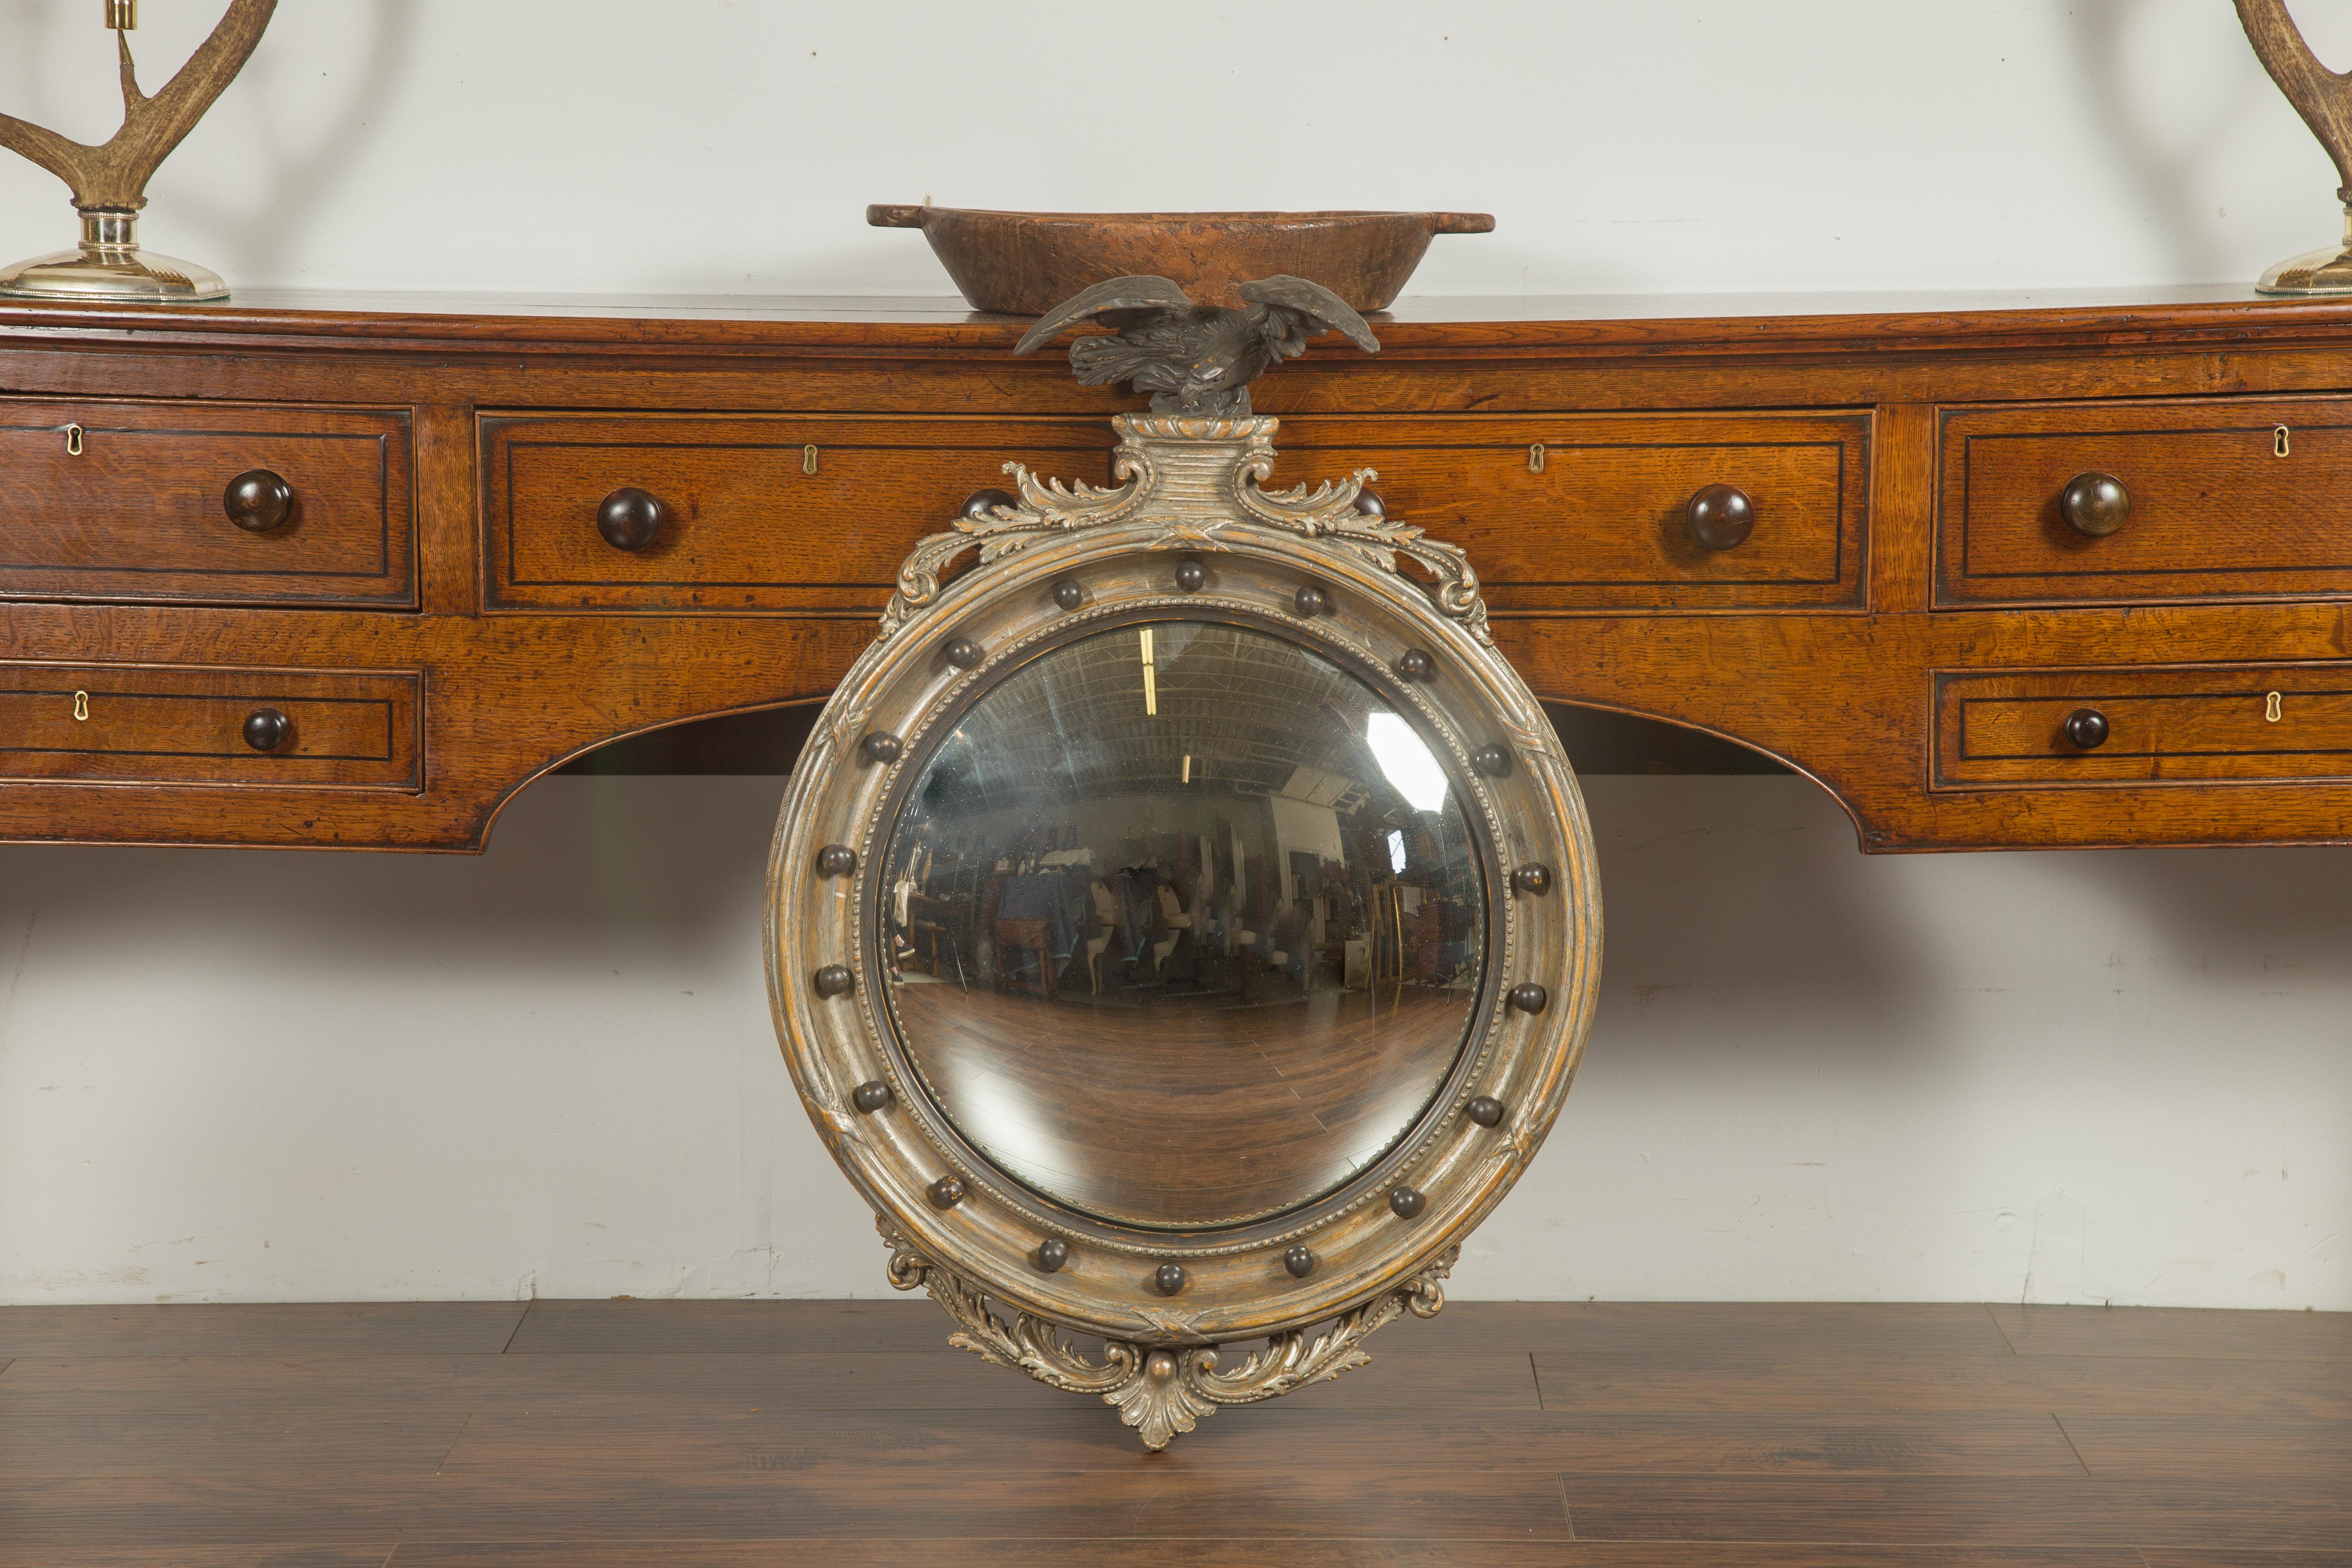 An English silver leaf convex girandole bullseye mirror from the early 20th century, with carved eagle motif and volutes. Created in England during the early years of the 20th century, this silver leaf girandole mirror attracts our attention with